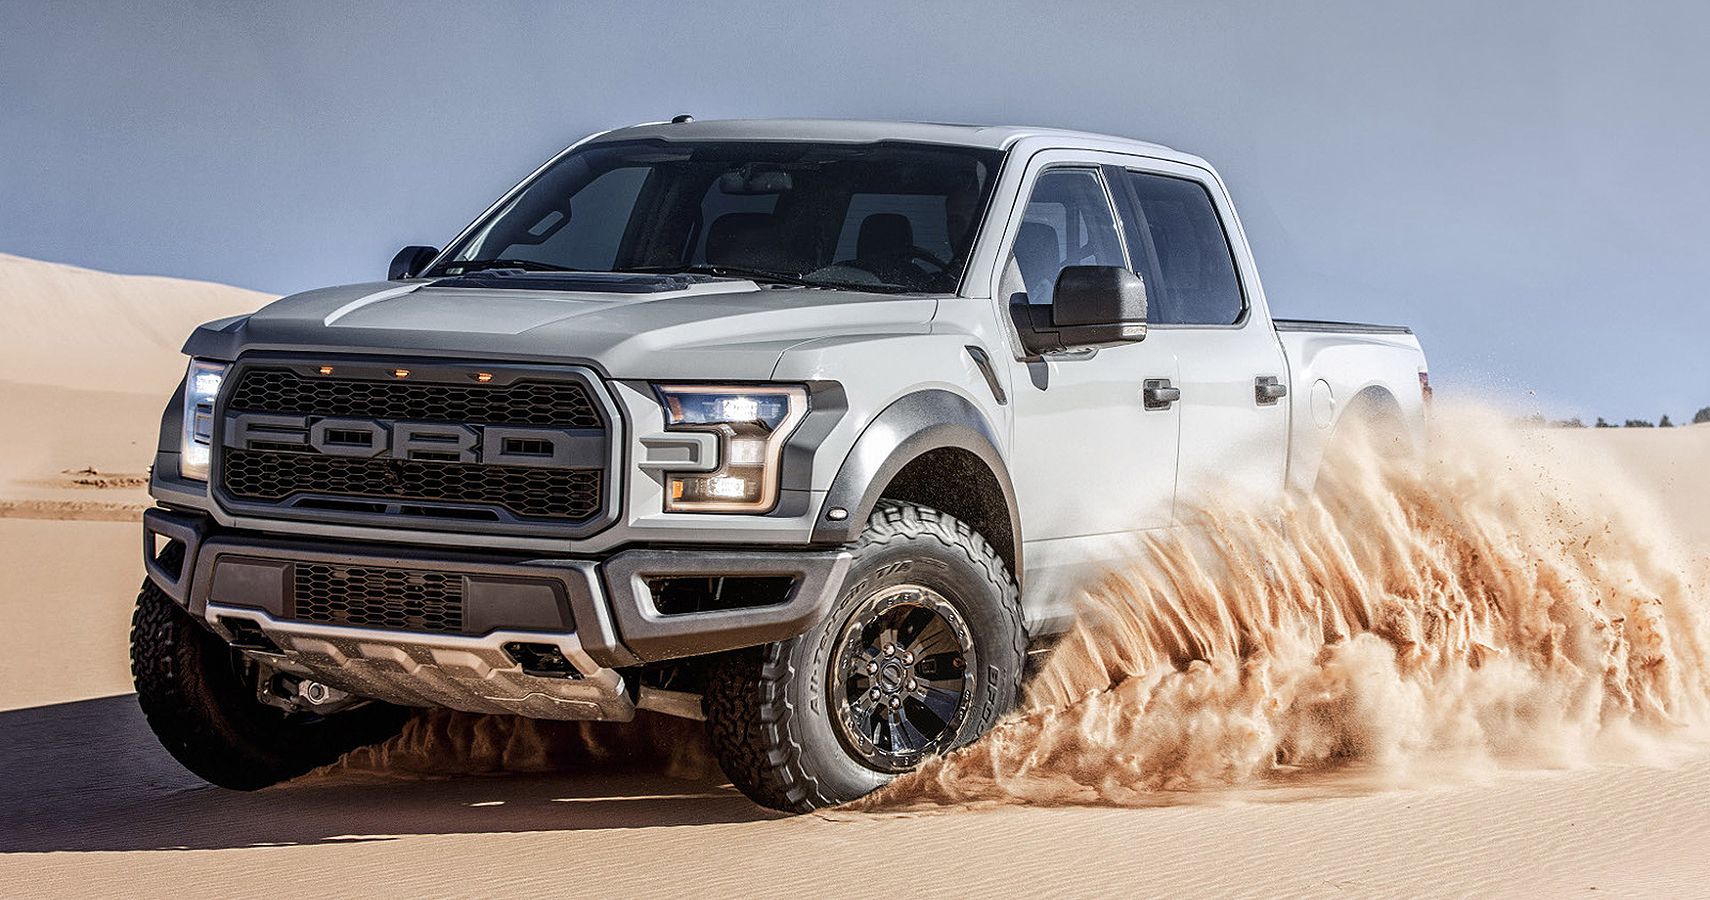 The Beast On The Road: Ford F-150 Raptor